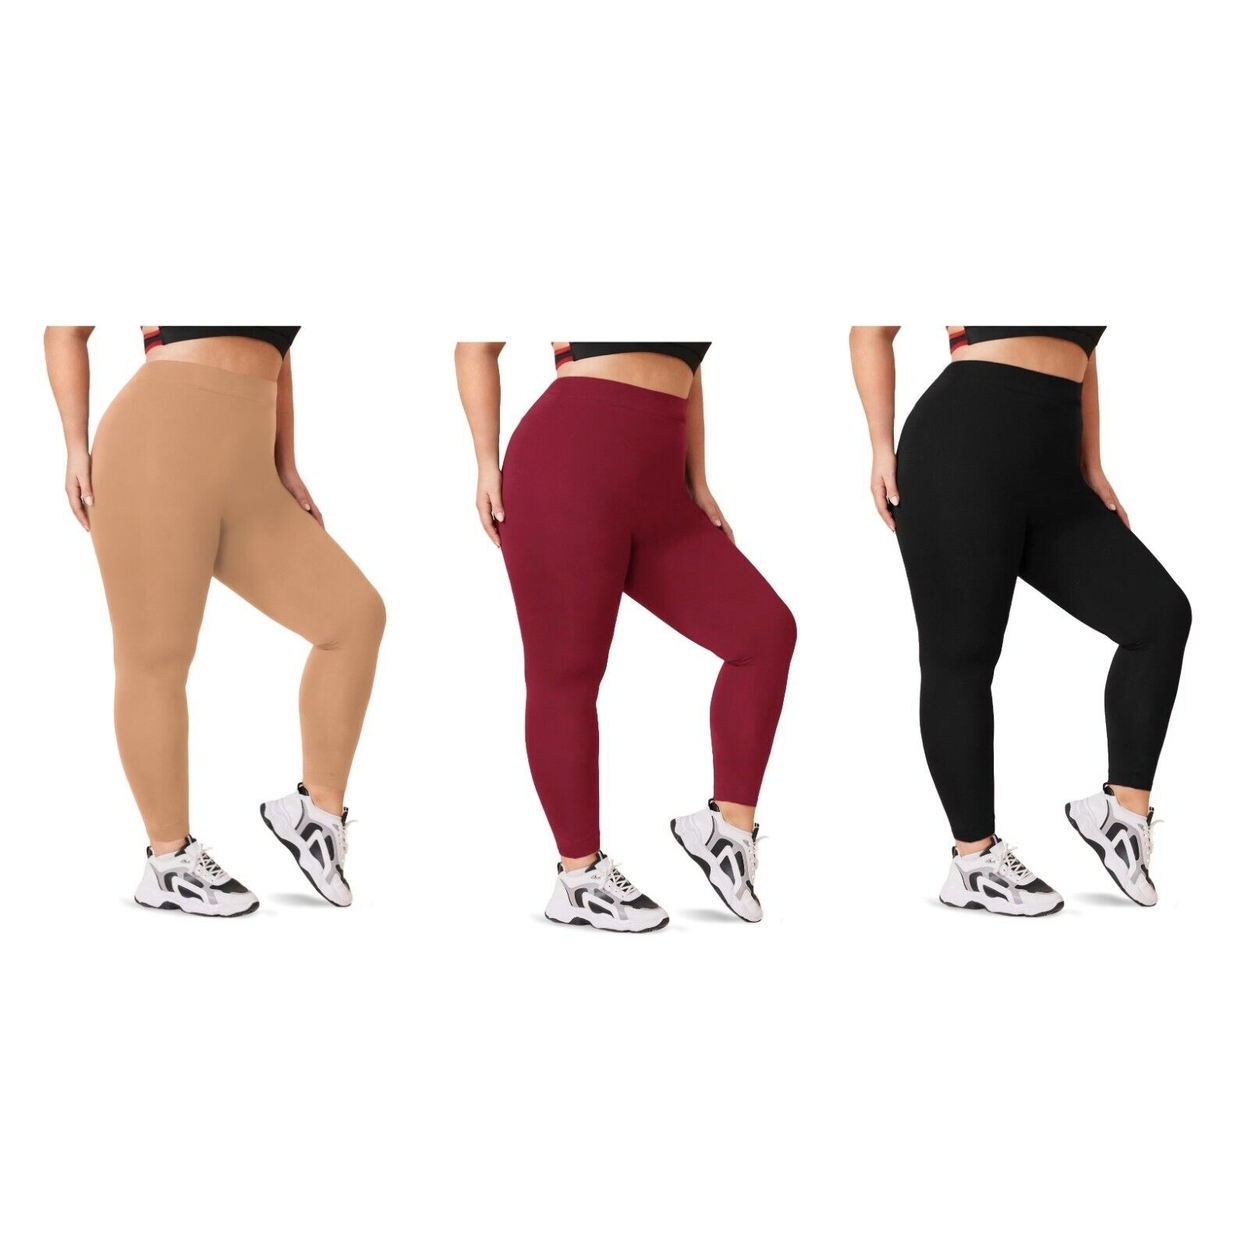 2-Pack: Women's Casual Ultra-Soft Smooth High Waisted Athletic Active Yoga Leggings Plus Size Available - Beige & Black, 3x